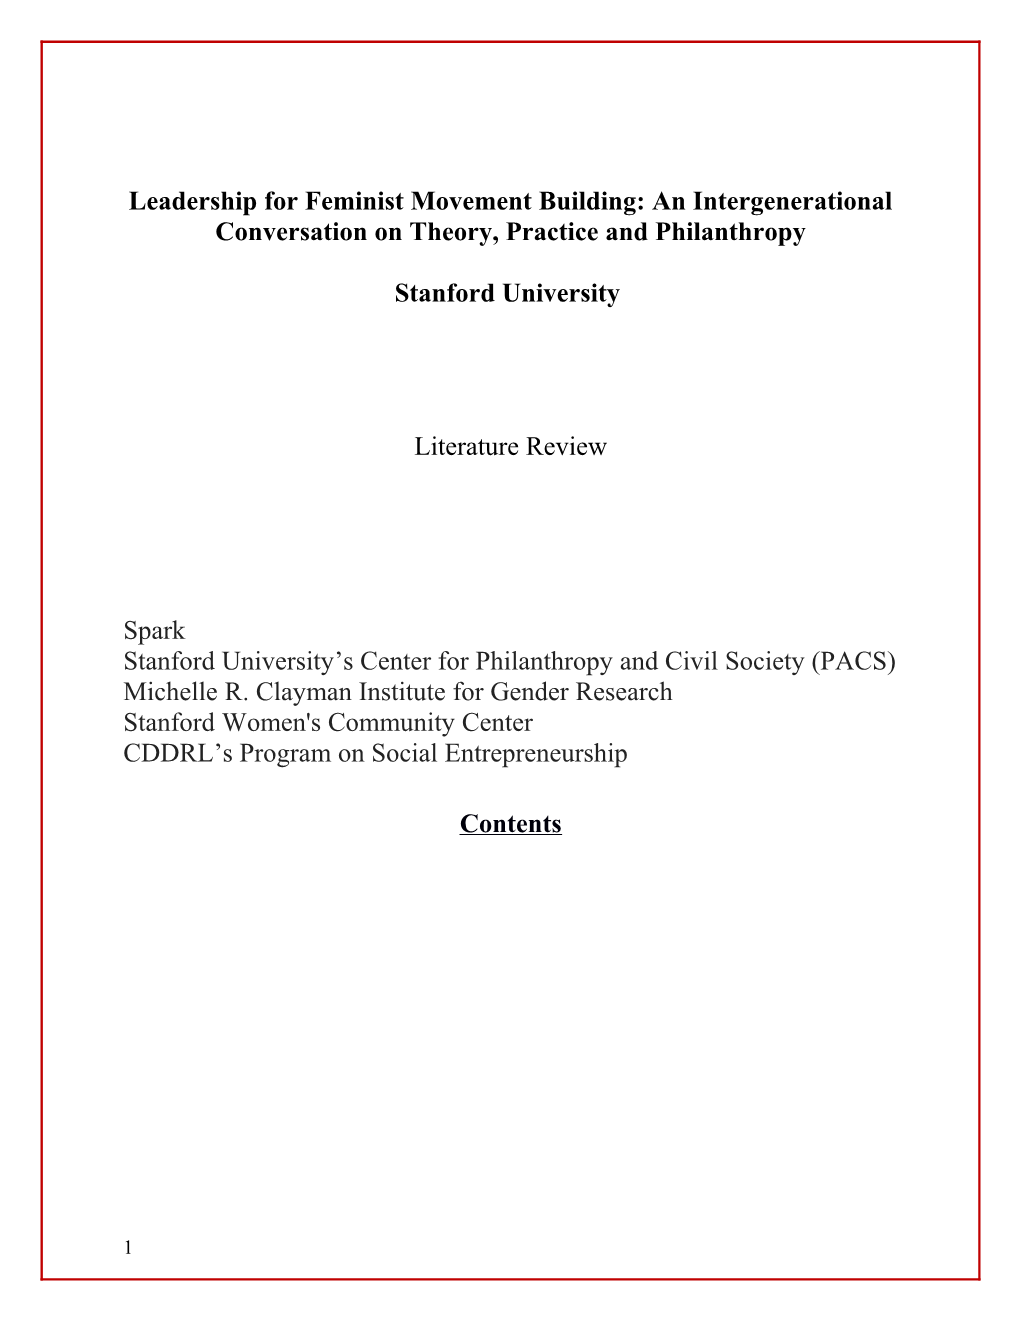 Leadership for Feminist Movement Building: an Intergenerational Conversation on Theory